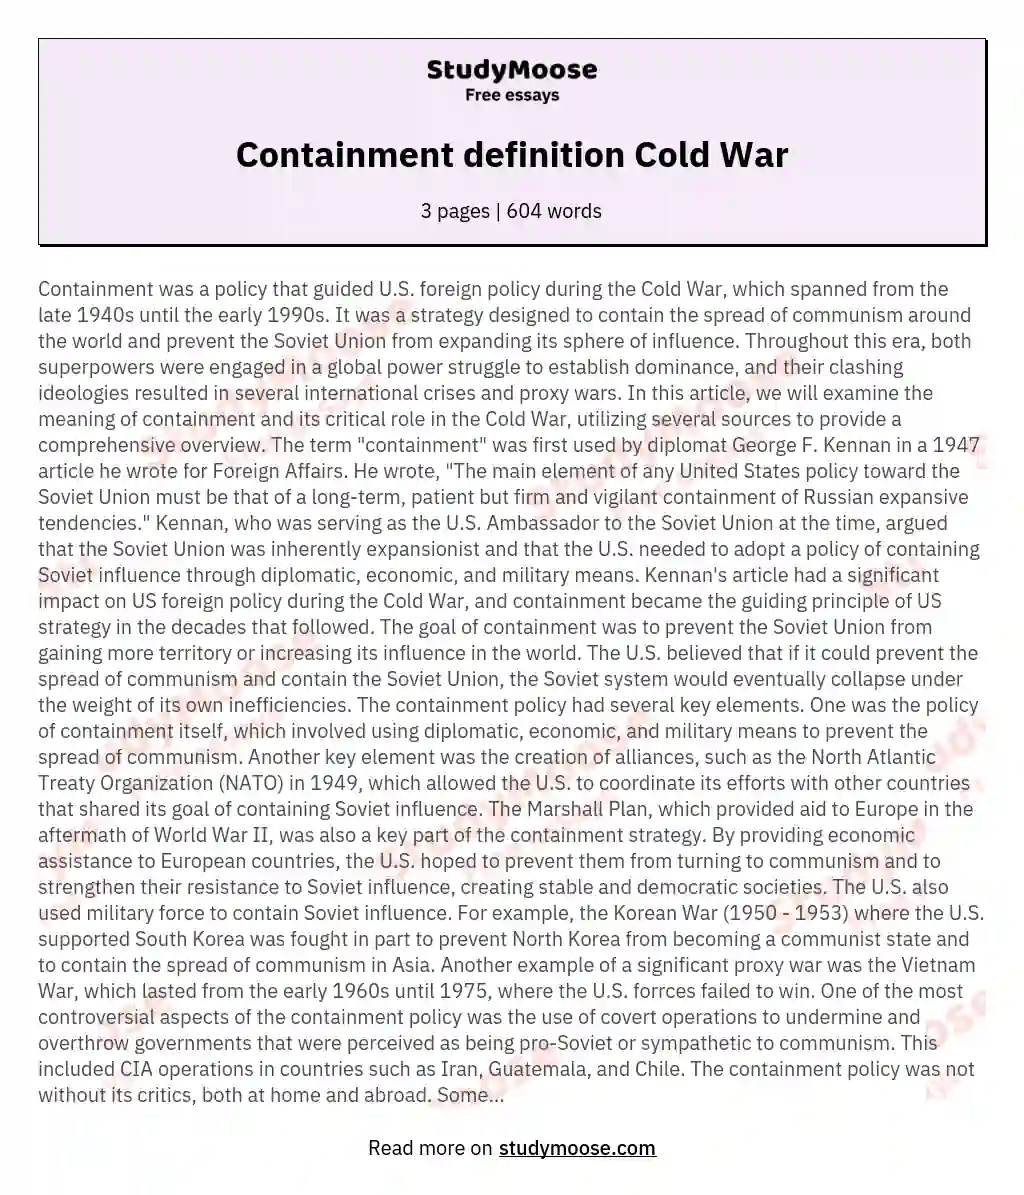 Containment definition Cold War essay